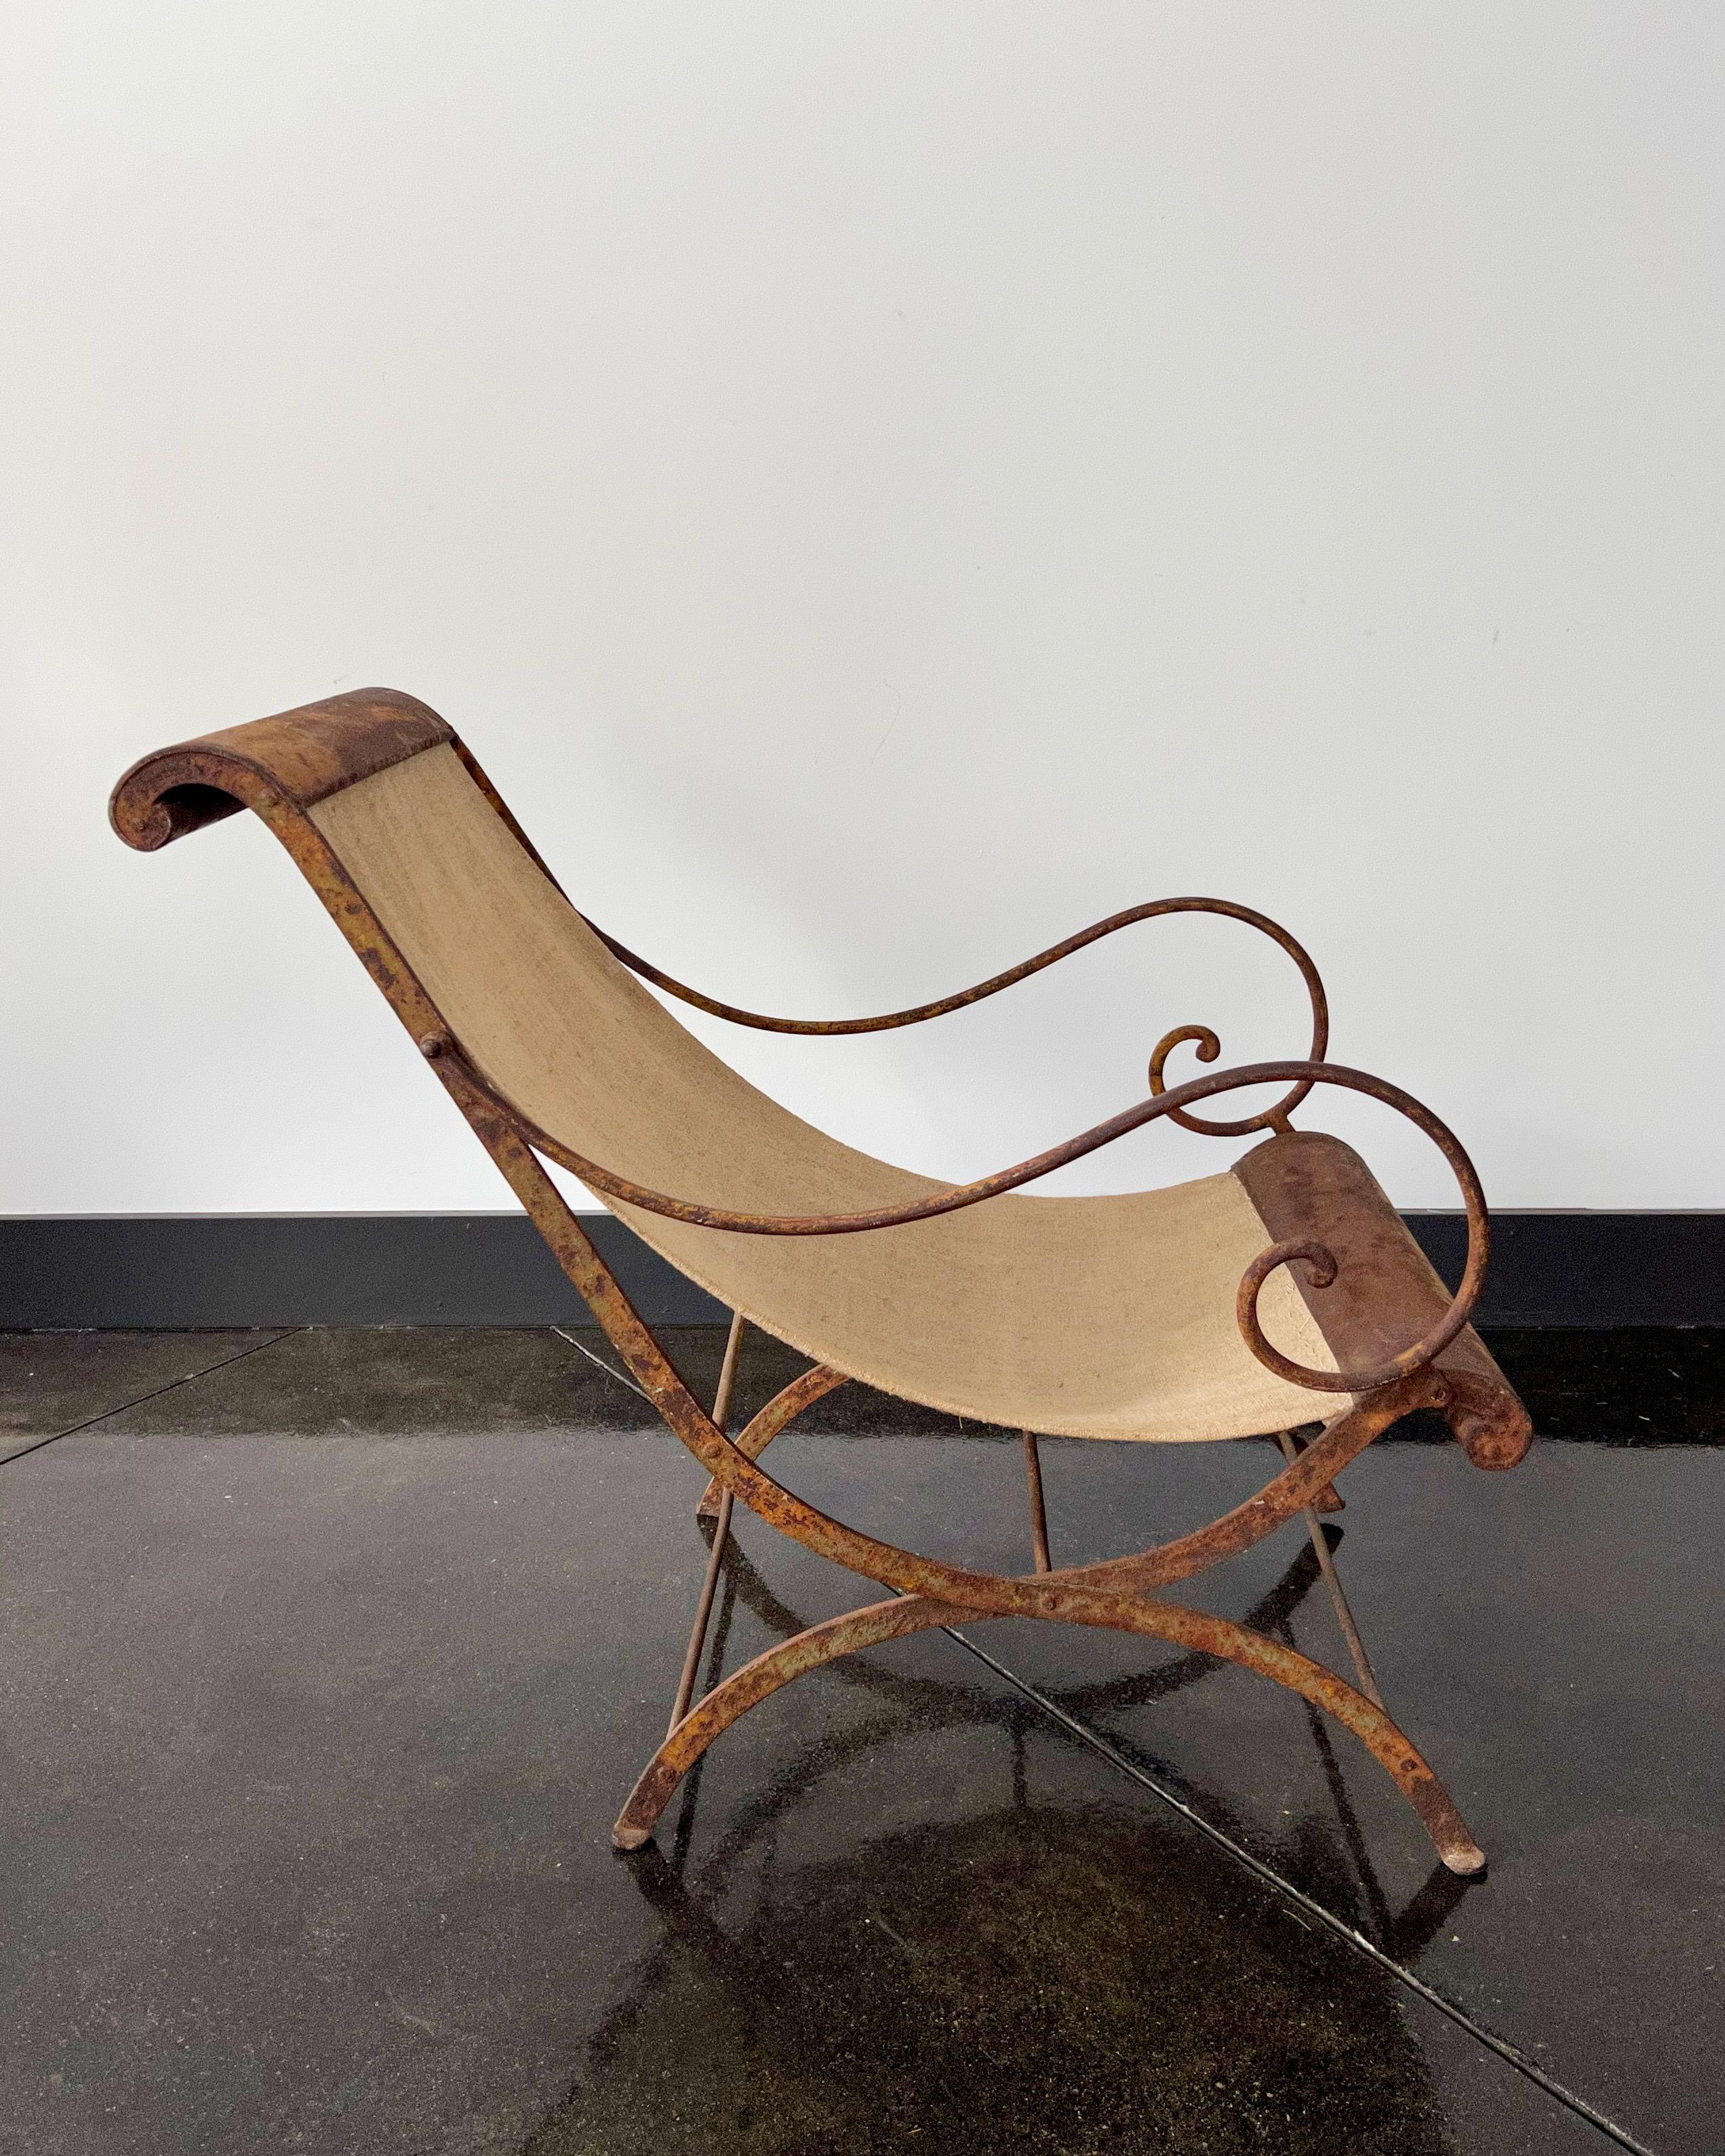 Rare 19th century iron French garden chaise. A delightful piece made of hand-forged iron -now patinated with rust with natural colored antique linen.

 